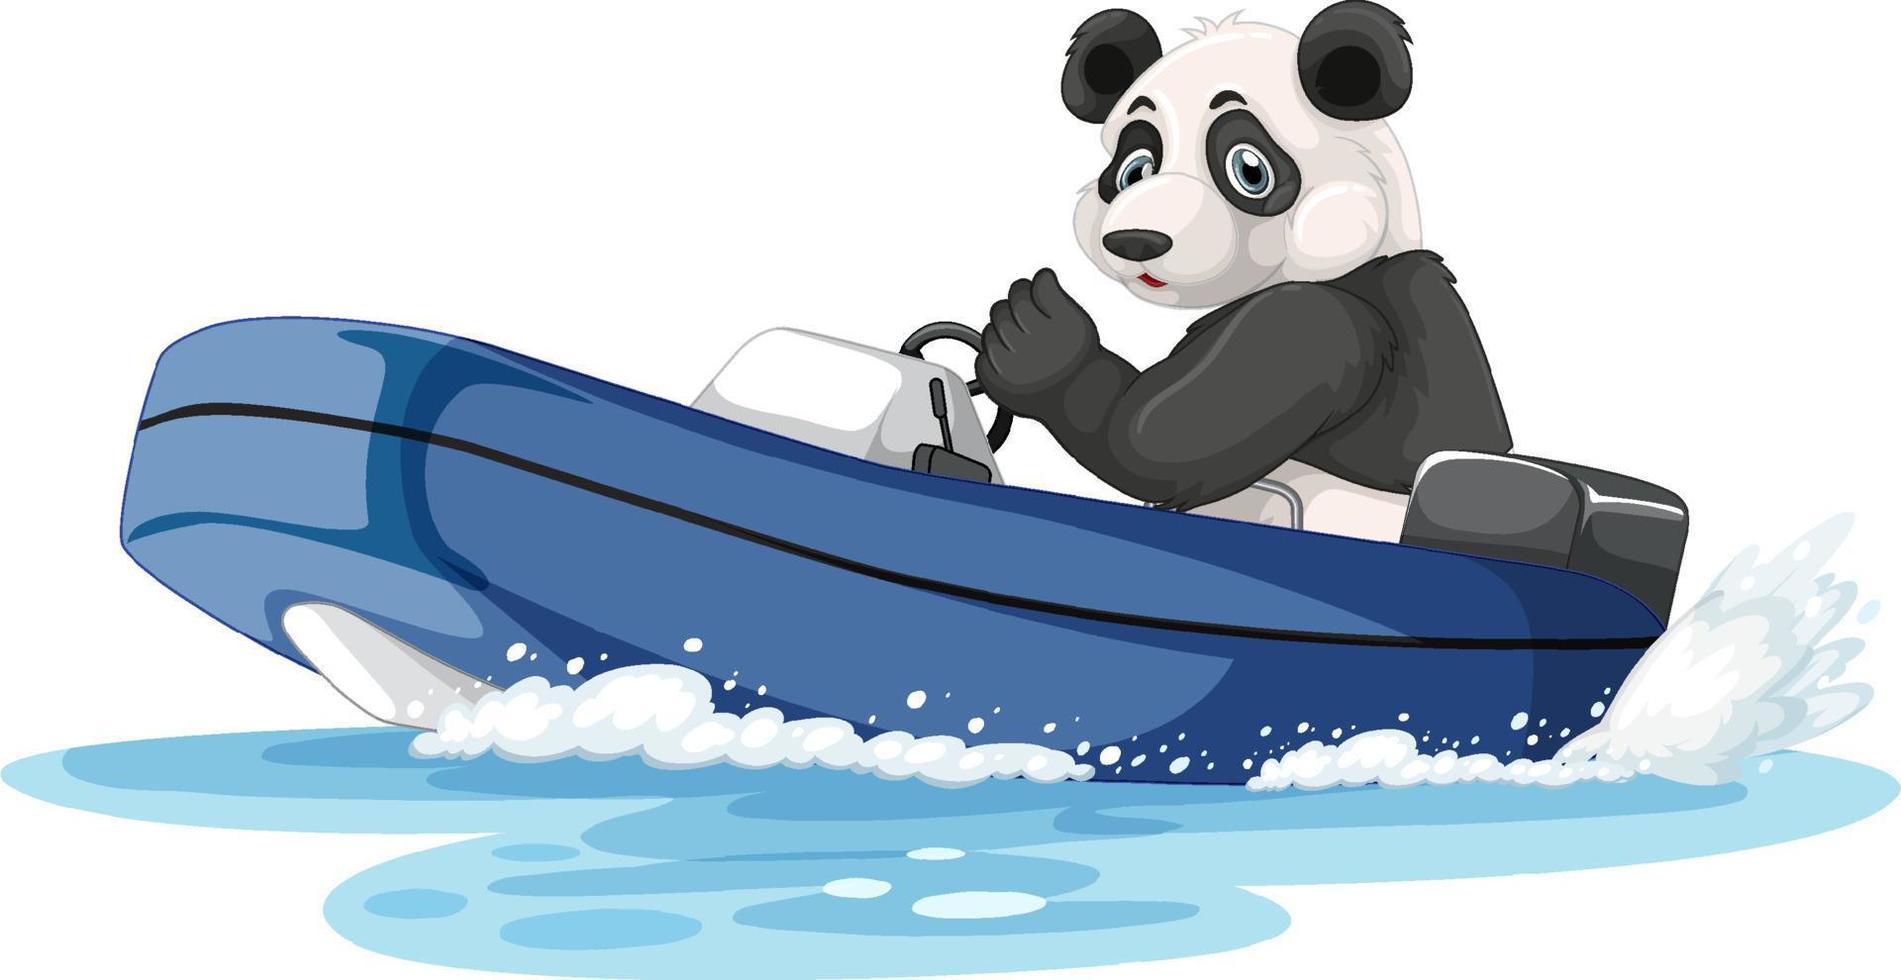 Panda on a speed boat in cartoon style vector